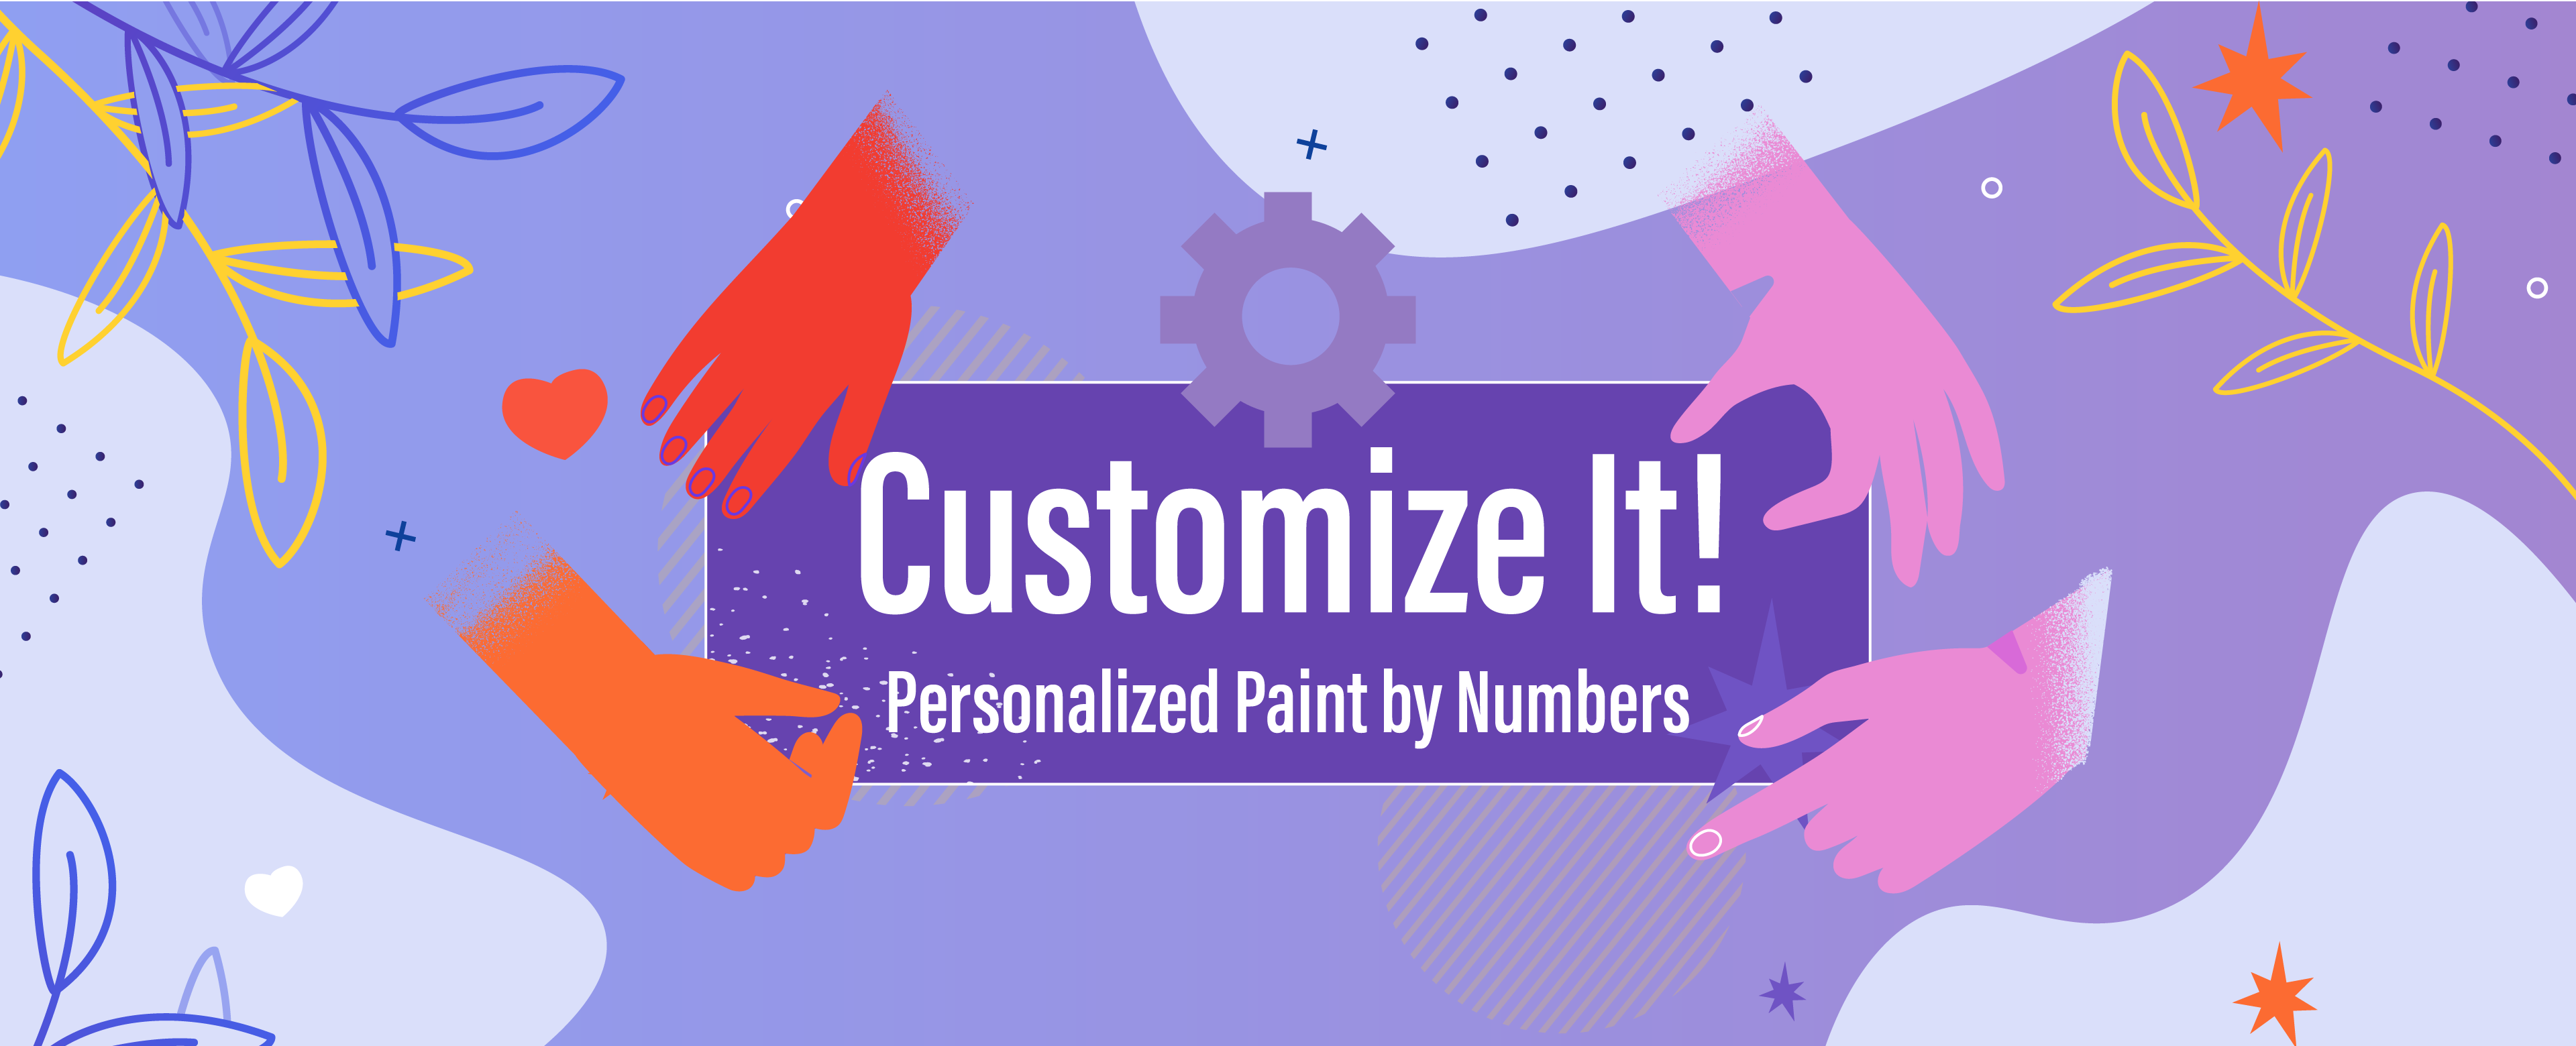 Customize It! Personalized Paint by Numbers